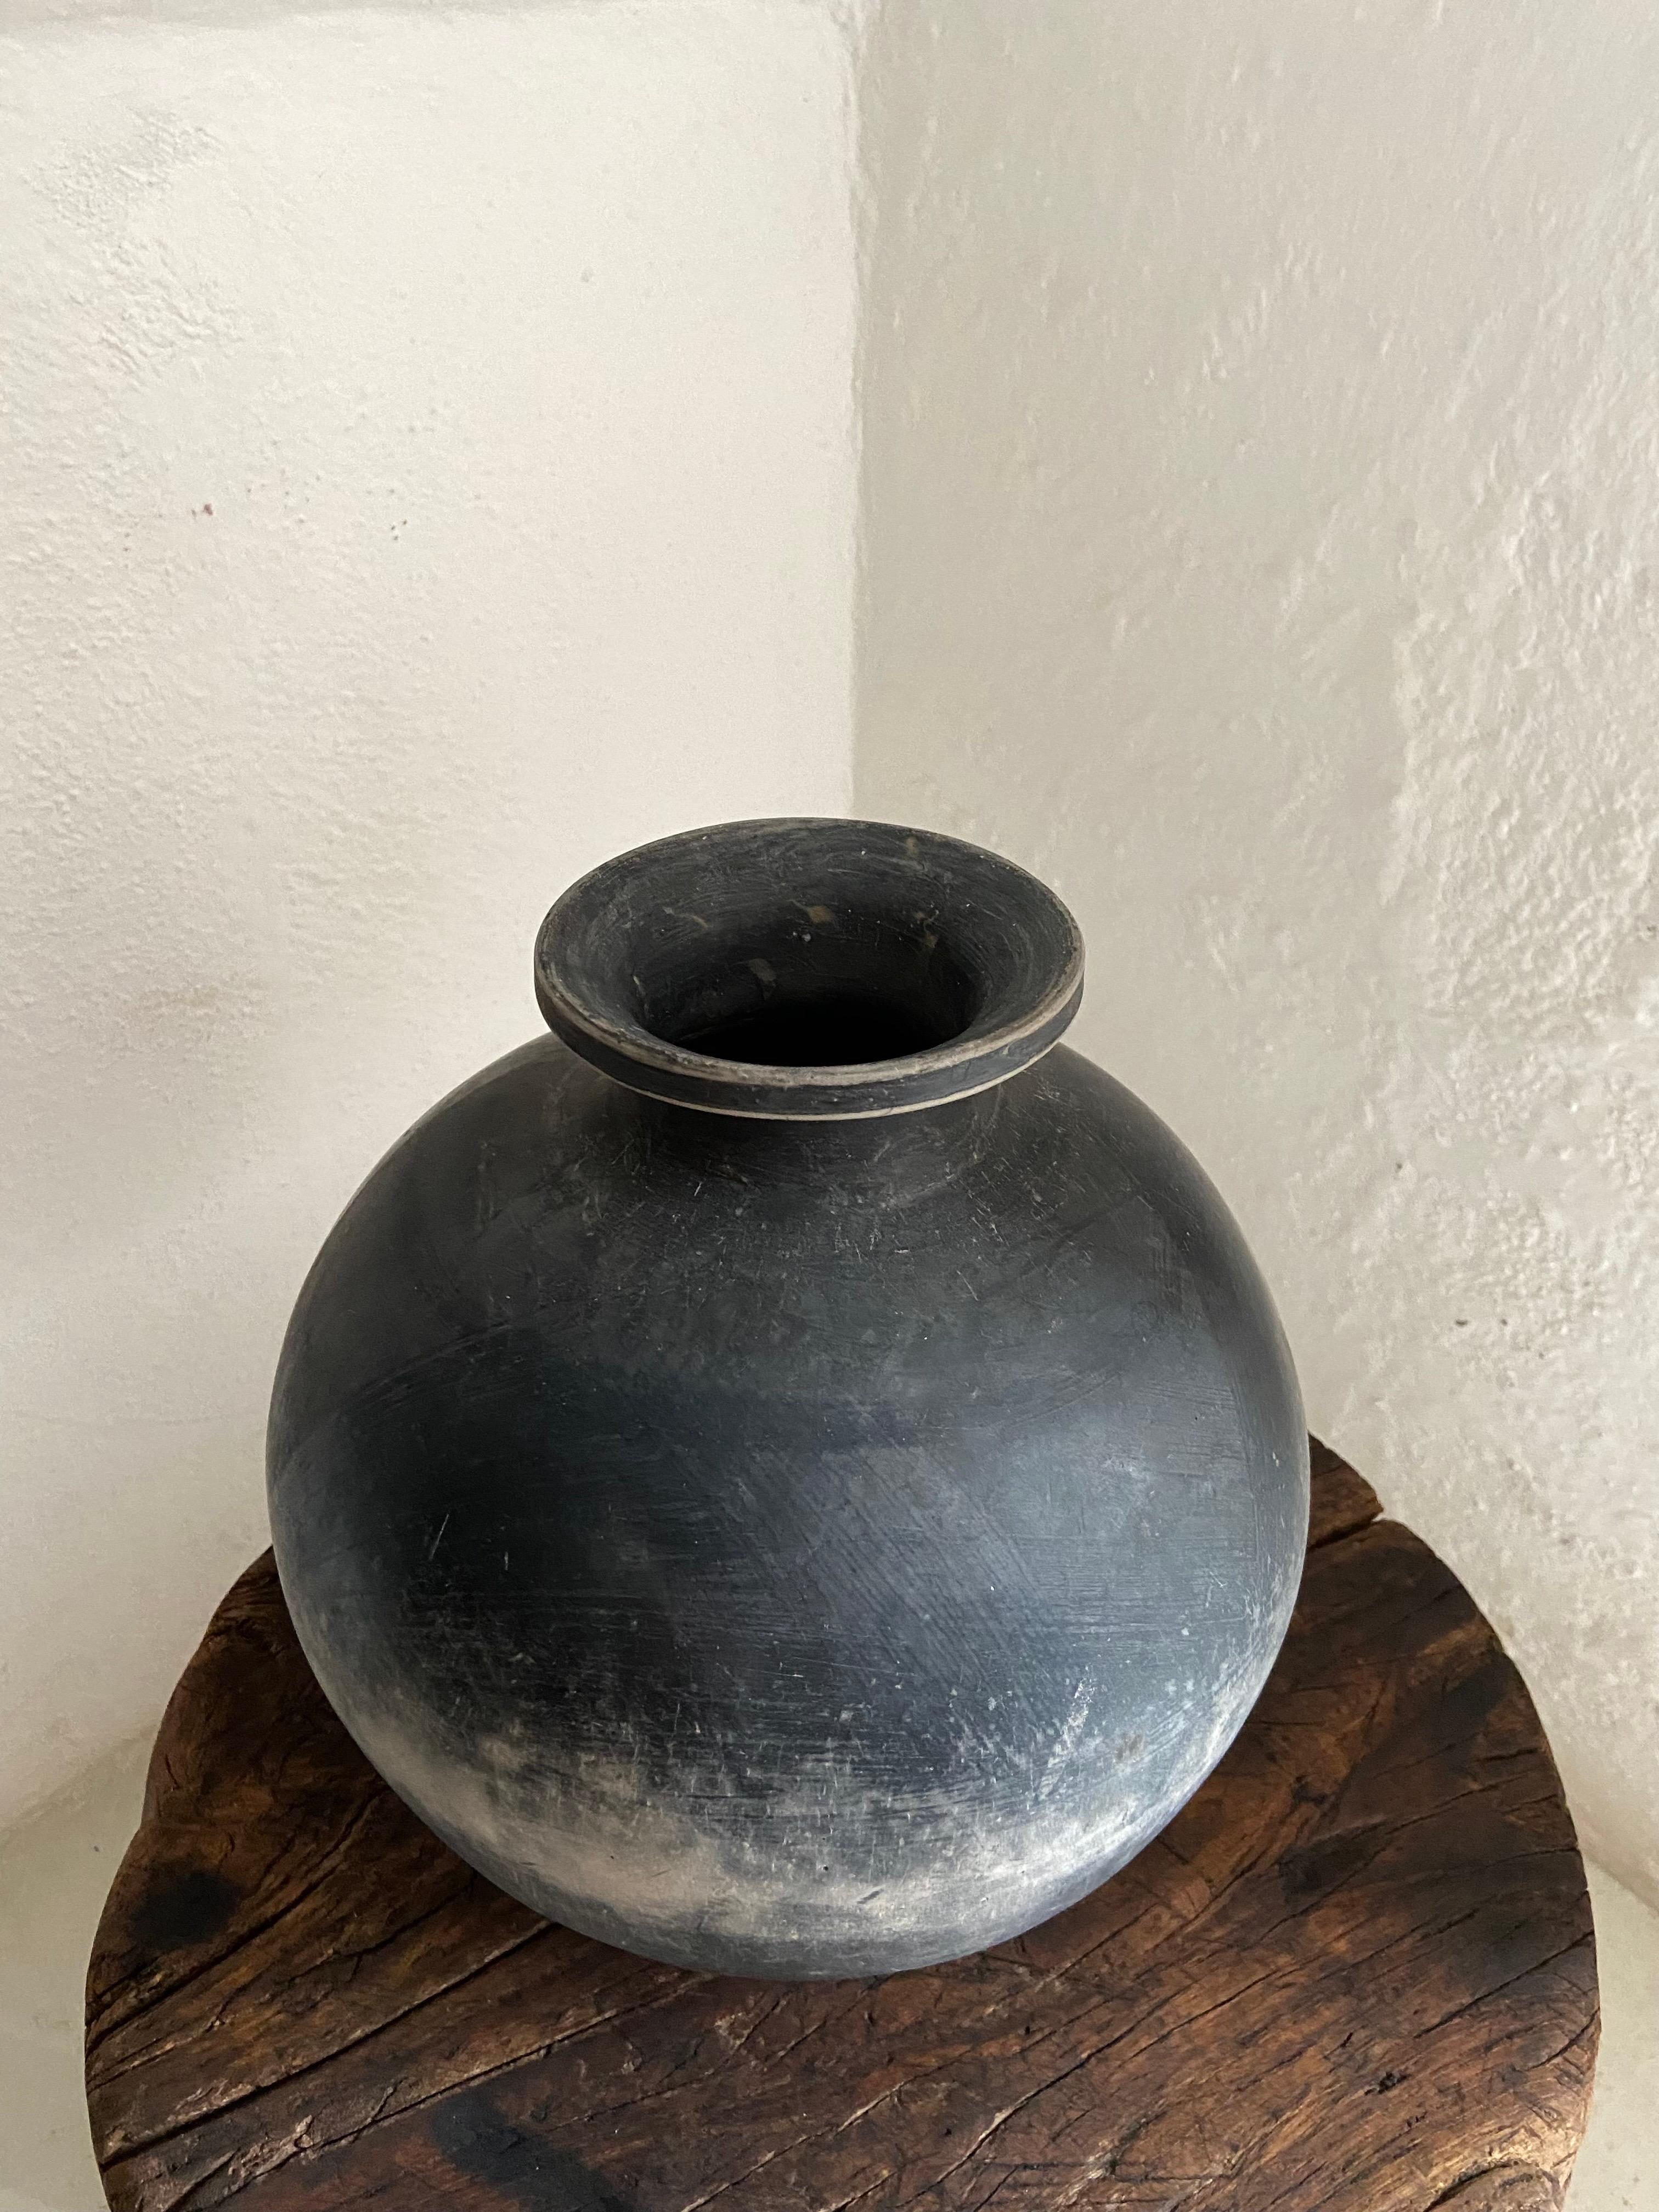 1950's Mezcal vessel from San Bartolo Coyotepec, Oaxaca (Mexico). This style of utilitarian pottery was hand crafted until the 1960's with the introduction of plastics. New designs are now available in the way of commercial folk art. The pot comes